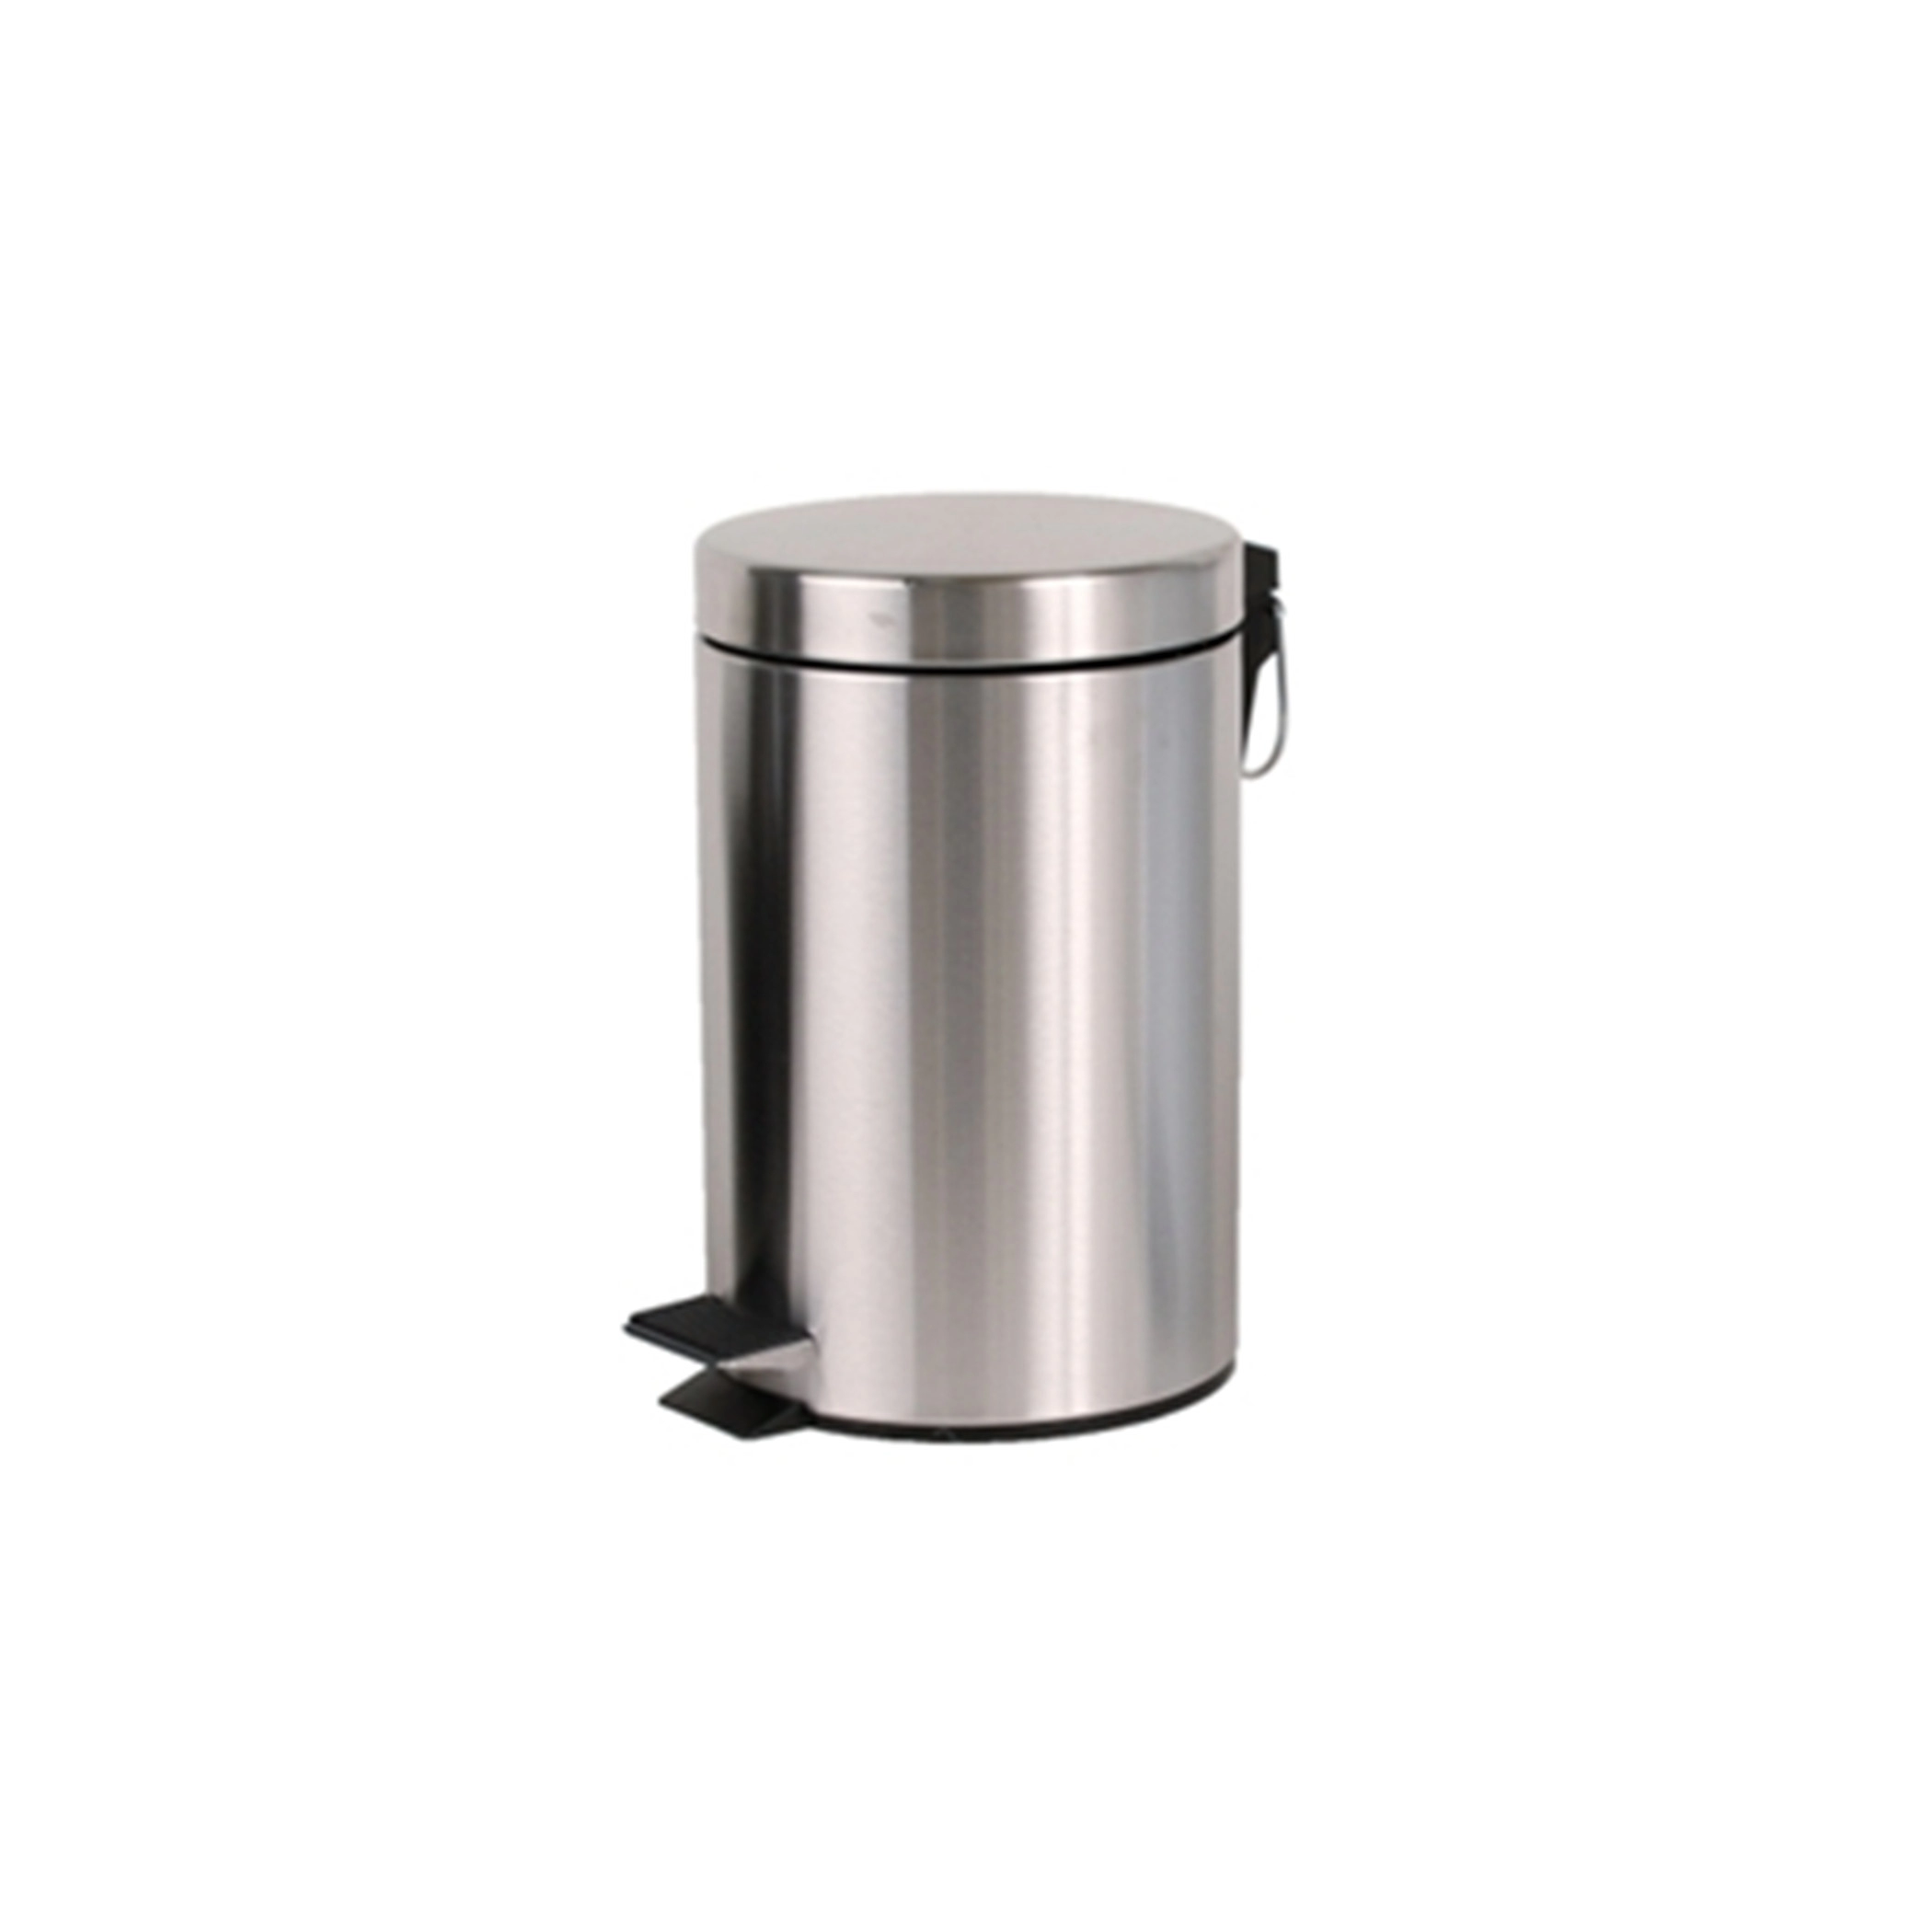 7L Stainless Steel Kitchen Garbage Cans